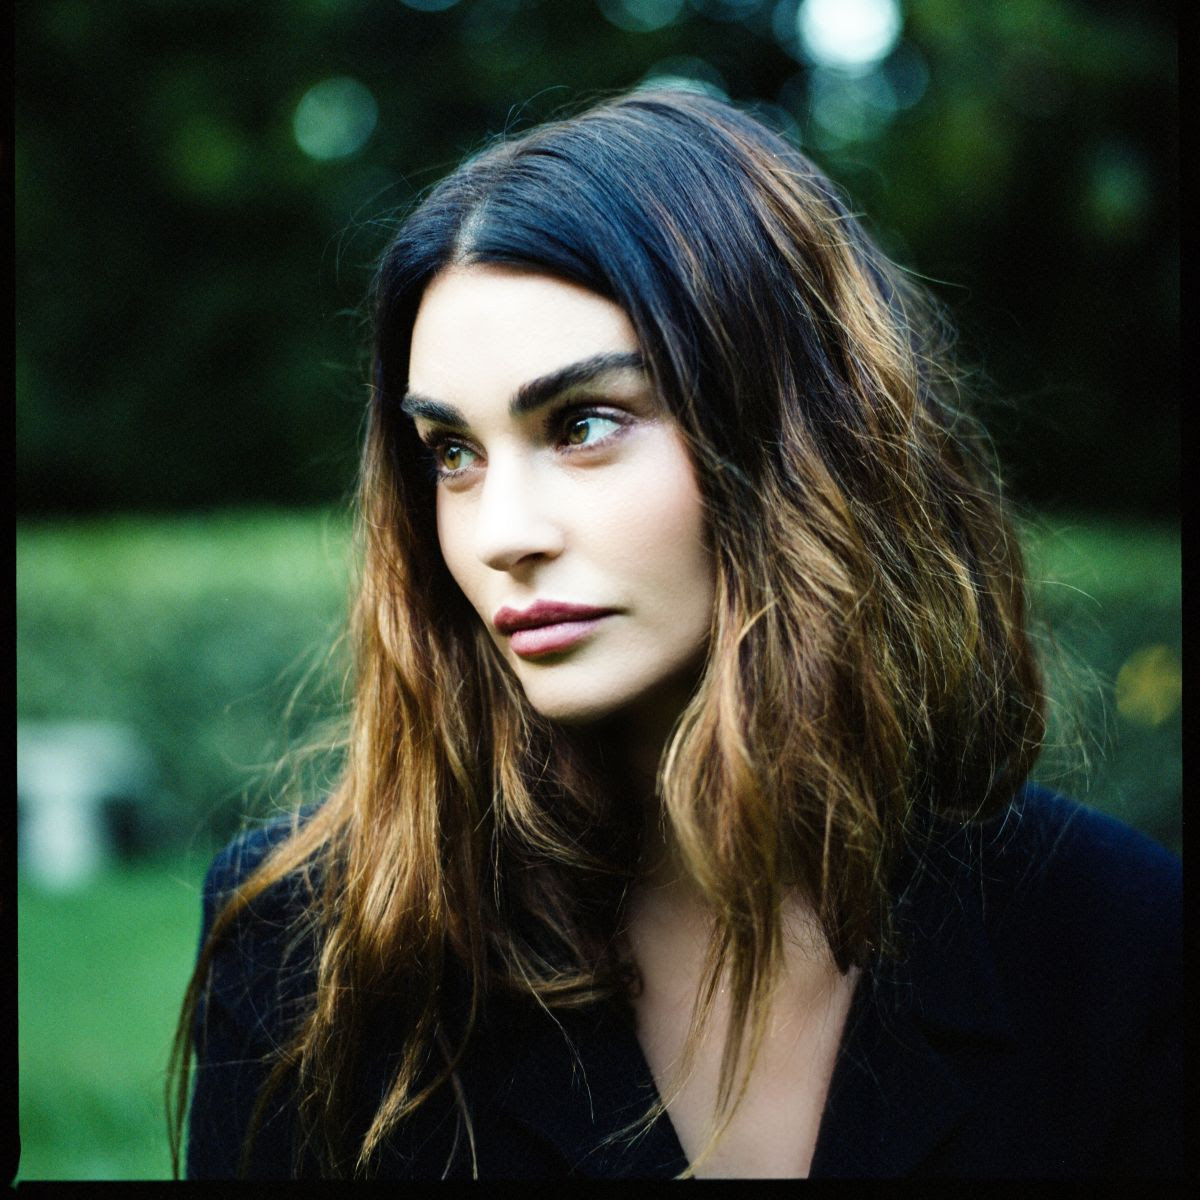 Aimee Osbourne Oldest Daughter Of Ozzy And Sharon Osbourne Is Ready For Her Musical Debut Cleveland Com